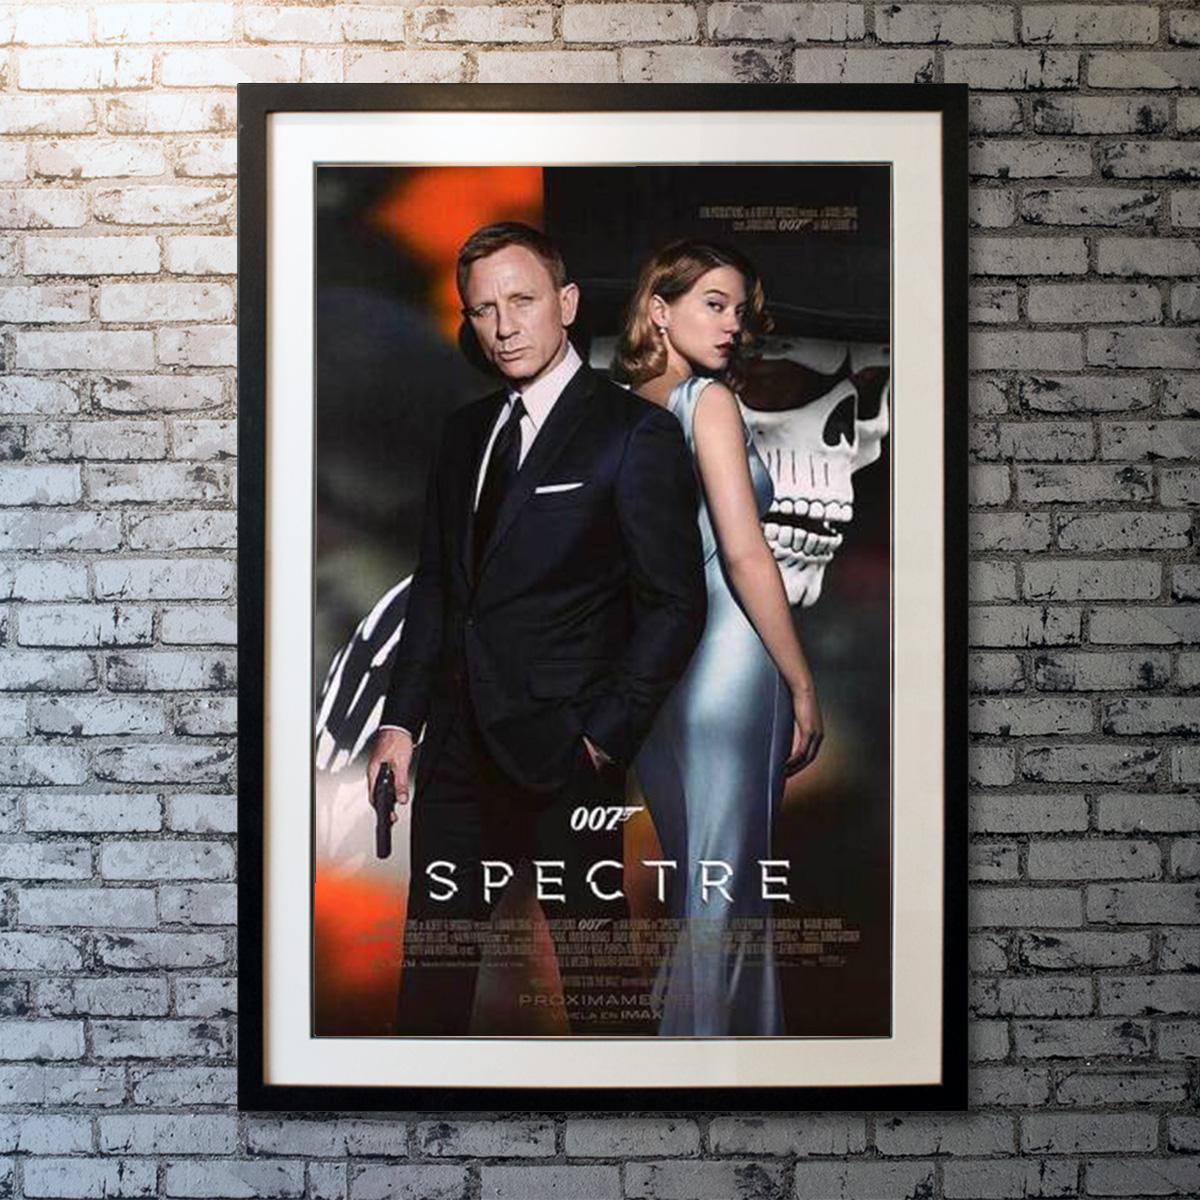 Spectre Regular 2015 Original Movie Poster Double Sided 27x40 inches 